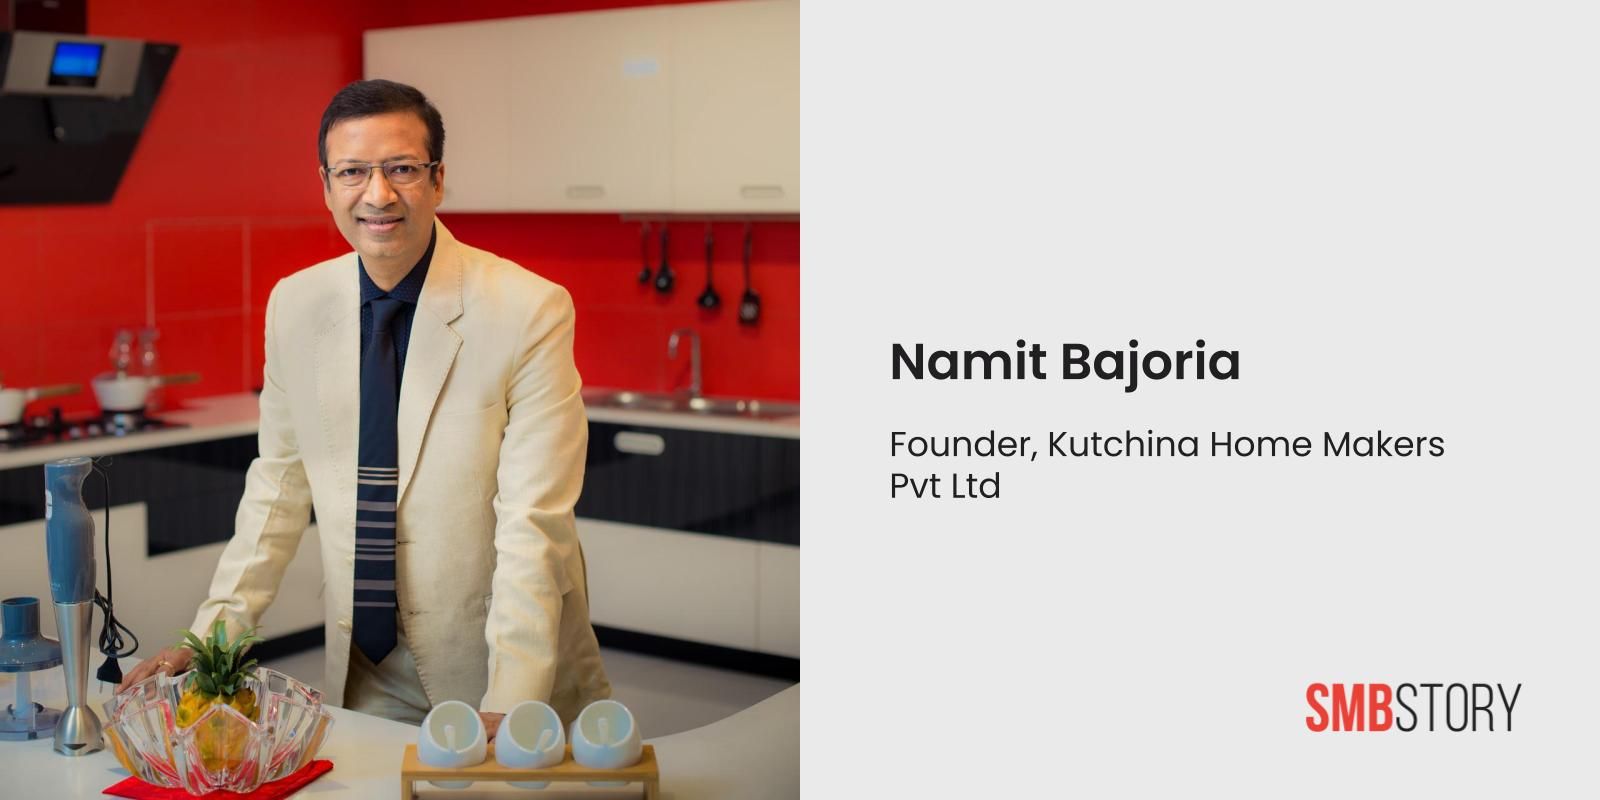 This Kolkata entrepreneur built a Rs 300 Cr kitchen solutions business from a Rs 1 lakh investment